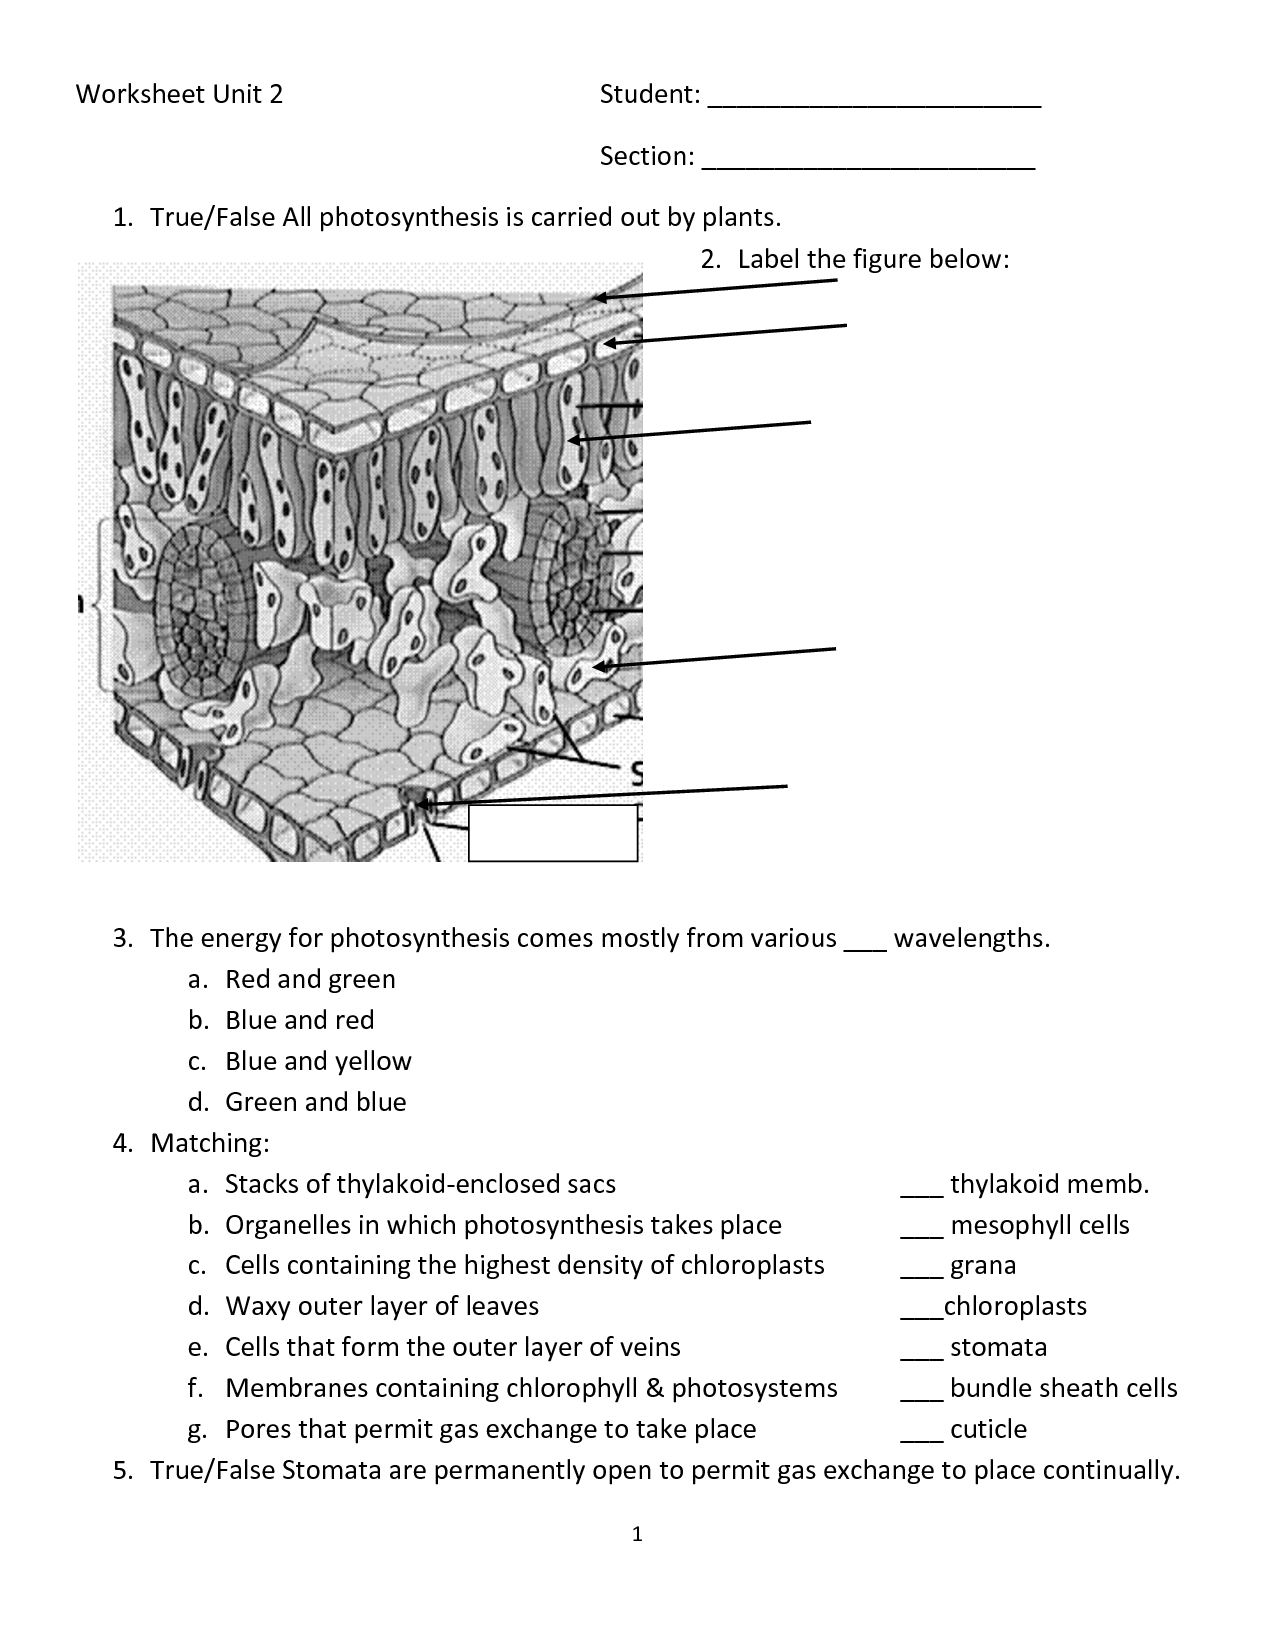 Photosynthesis Diagram Worksheet Answers